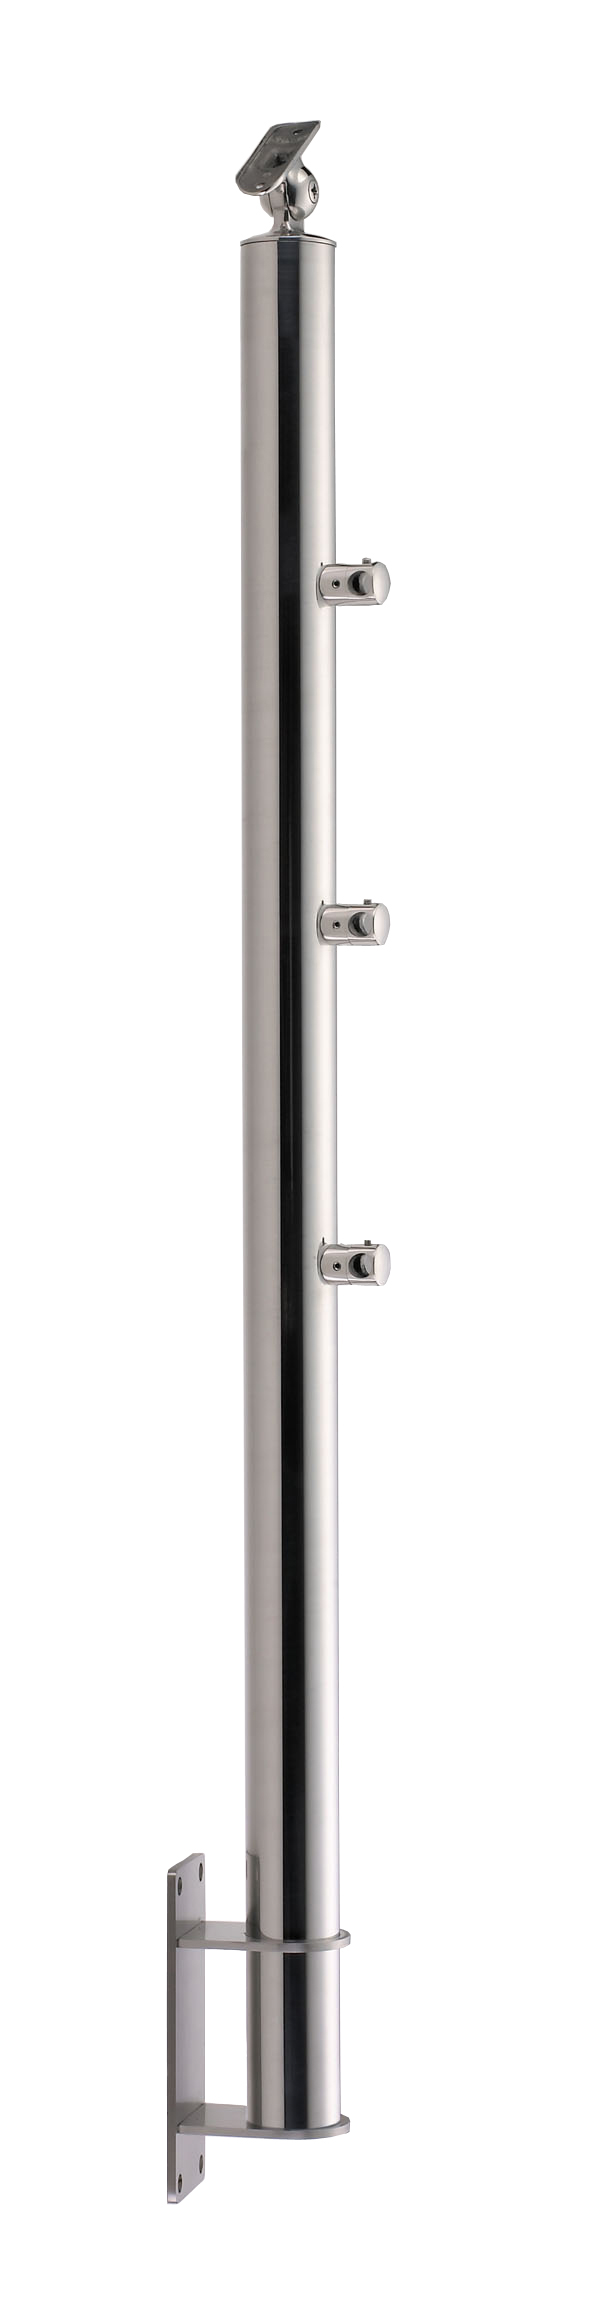 Stainless Steel Balustrade Posts - Tubular - SS:2020359A